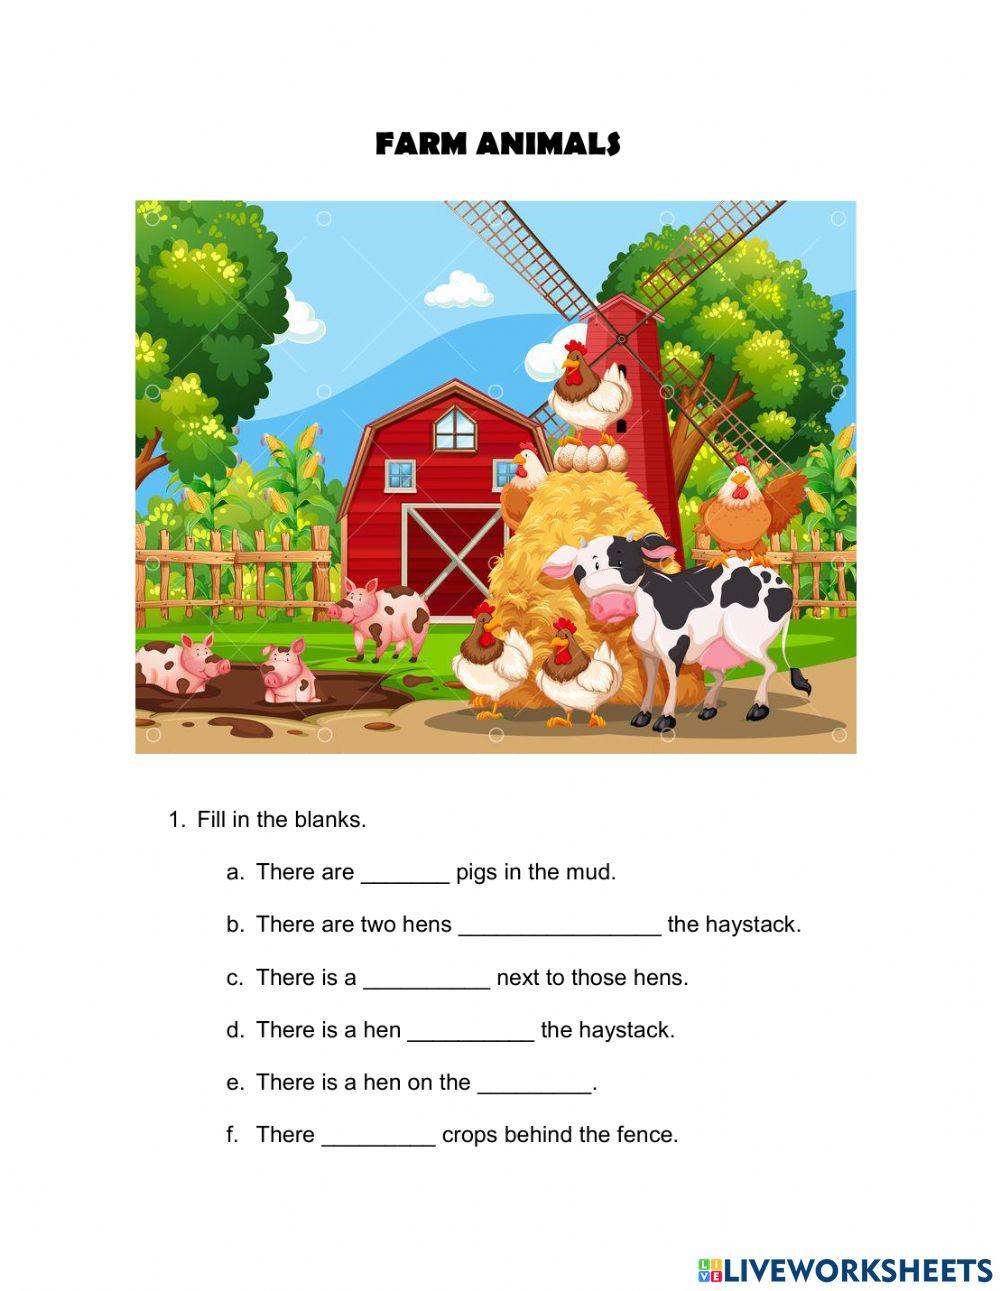 Farm animals - Prepositions of place